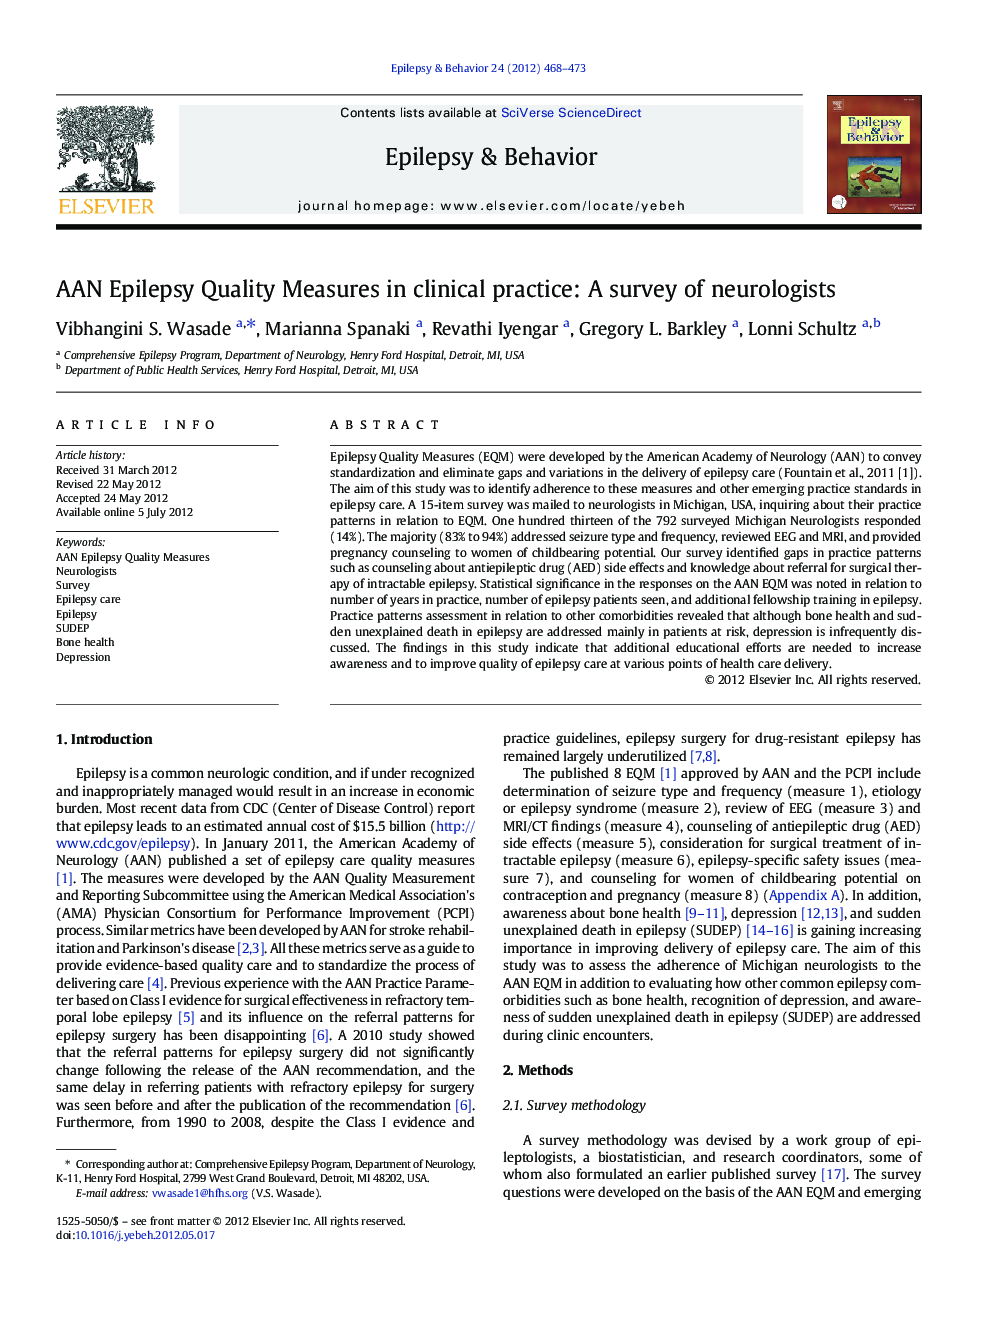 AAN Epilepsy Quality Measures in clinical practice: A survey of neurologists